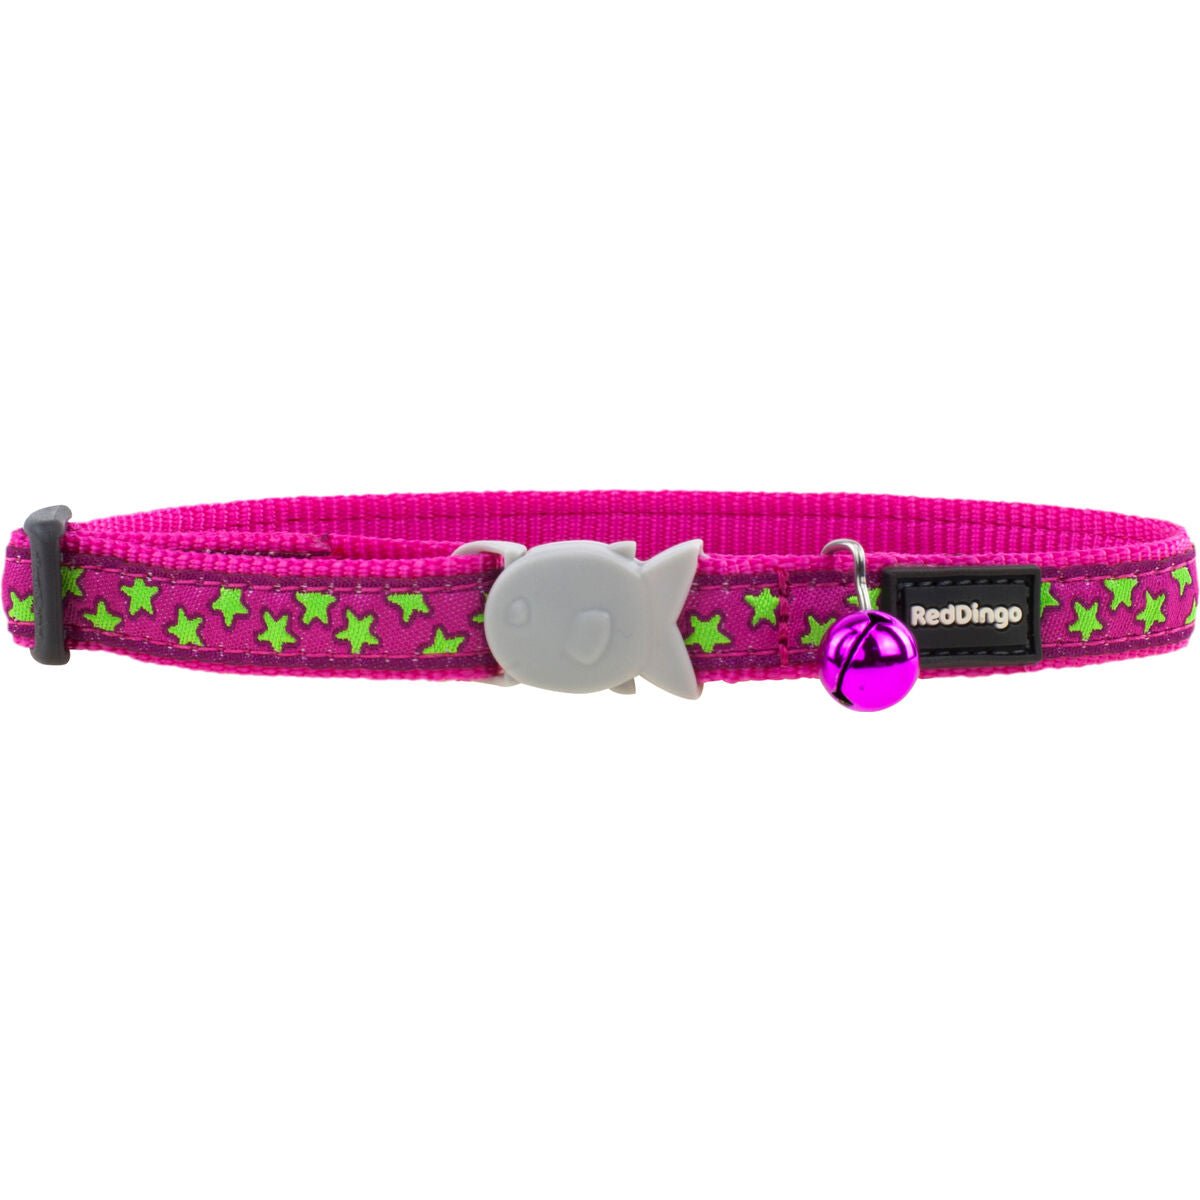 Hundhalsband Red Dingo STYLE STARS LIME ON HOT PINK 15 mm x 24-36 cm